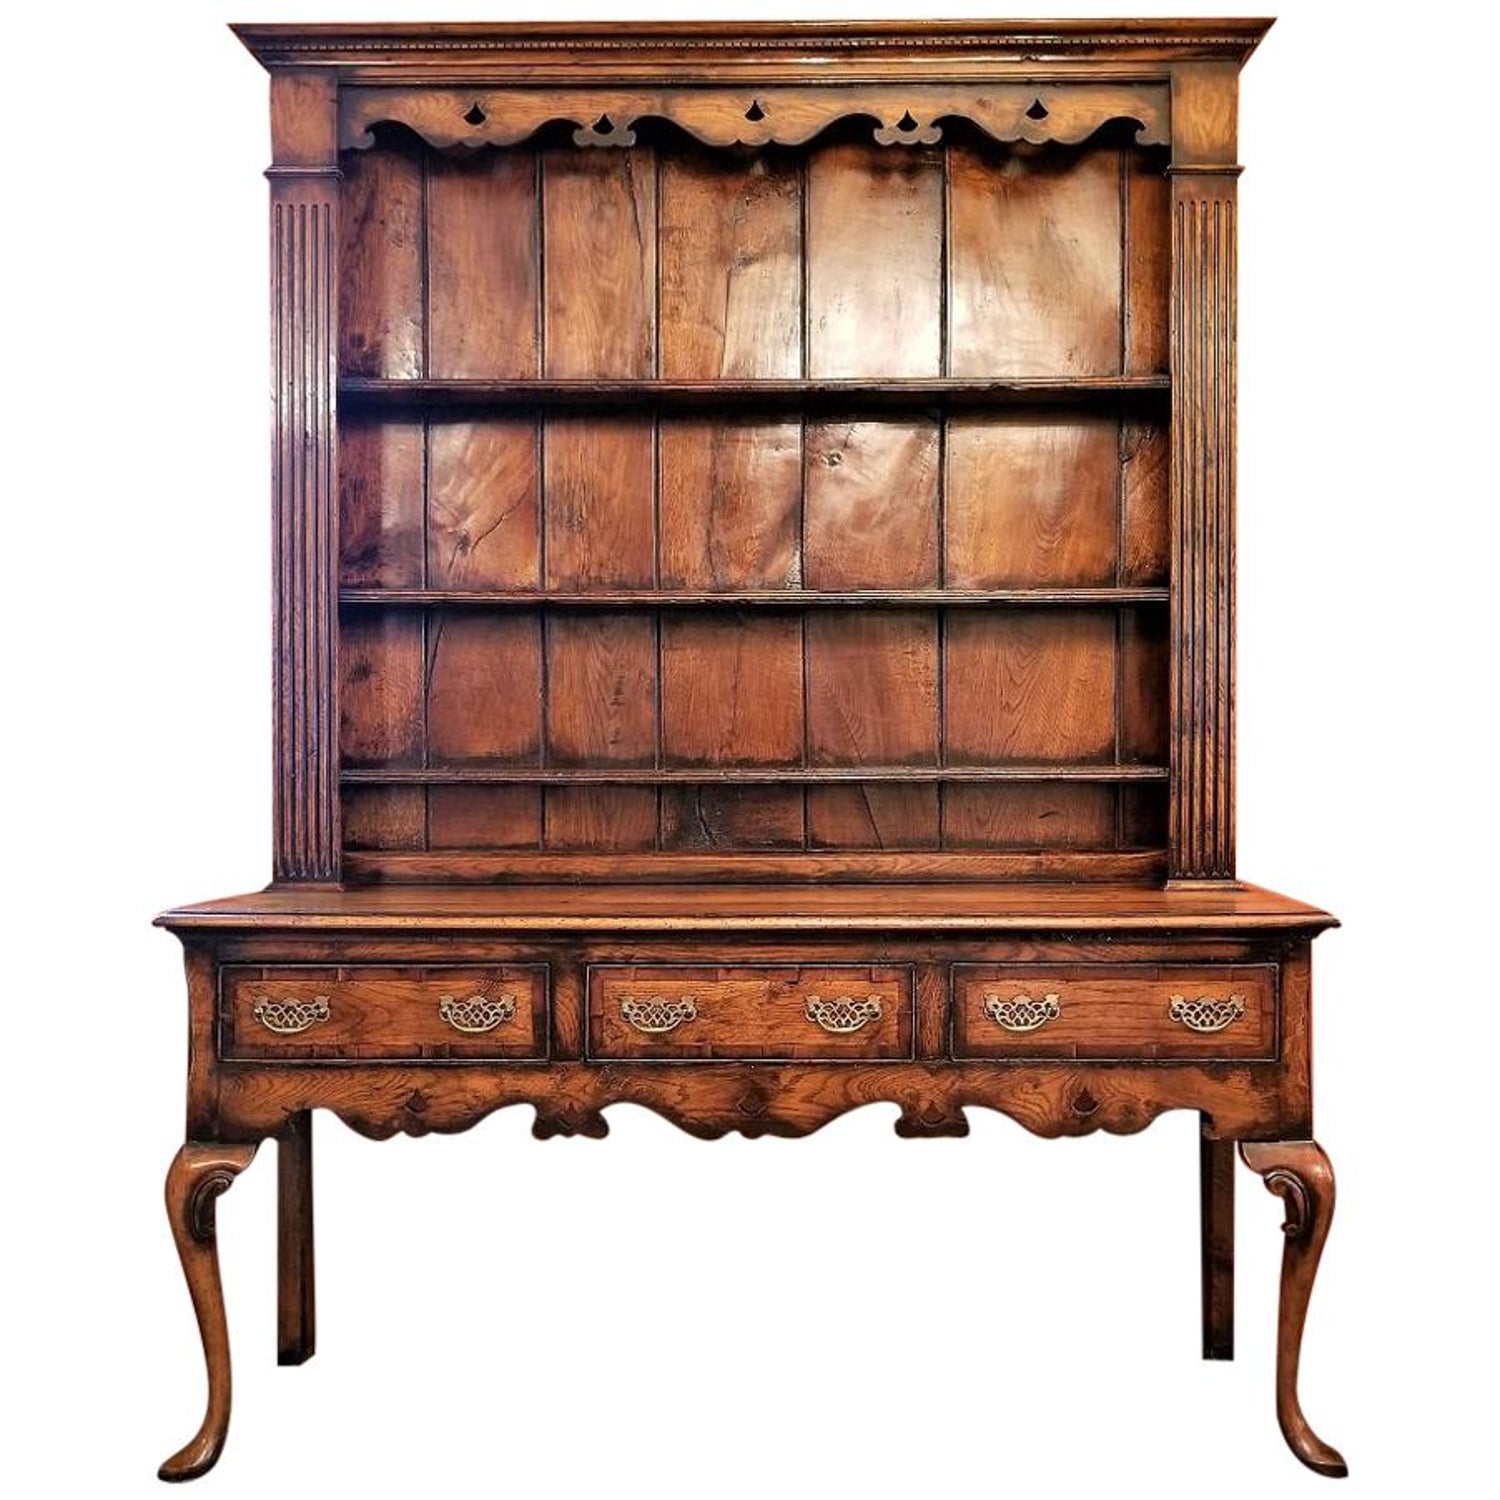 Welsh Dressers 21 For Sale At 1stdibs